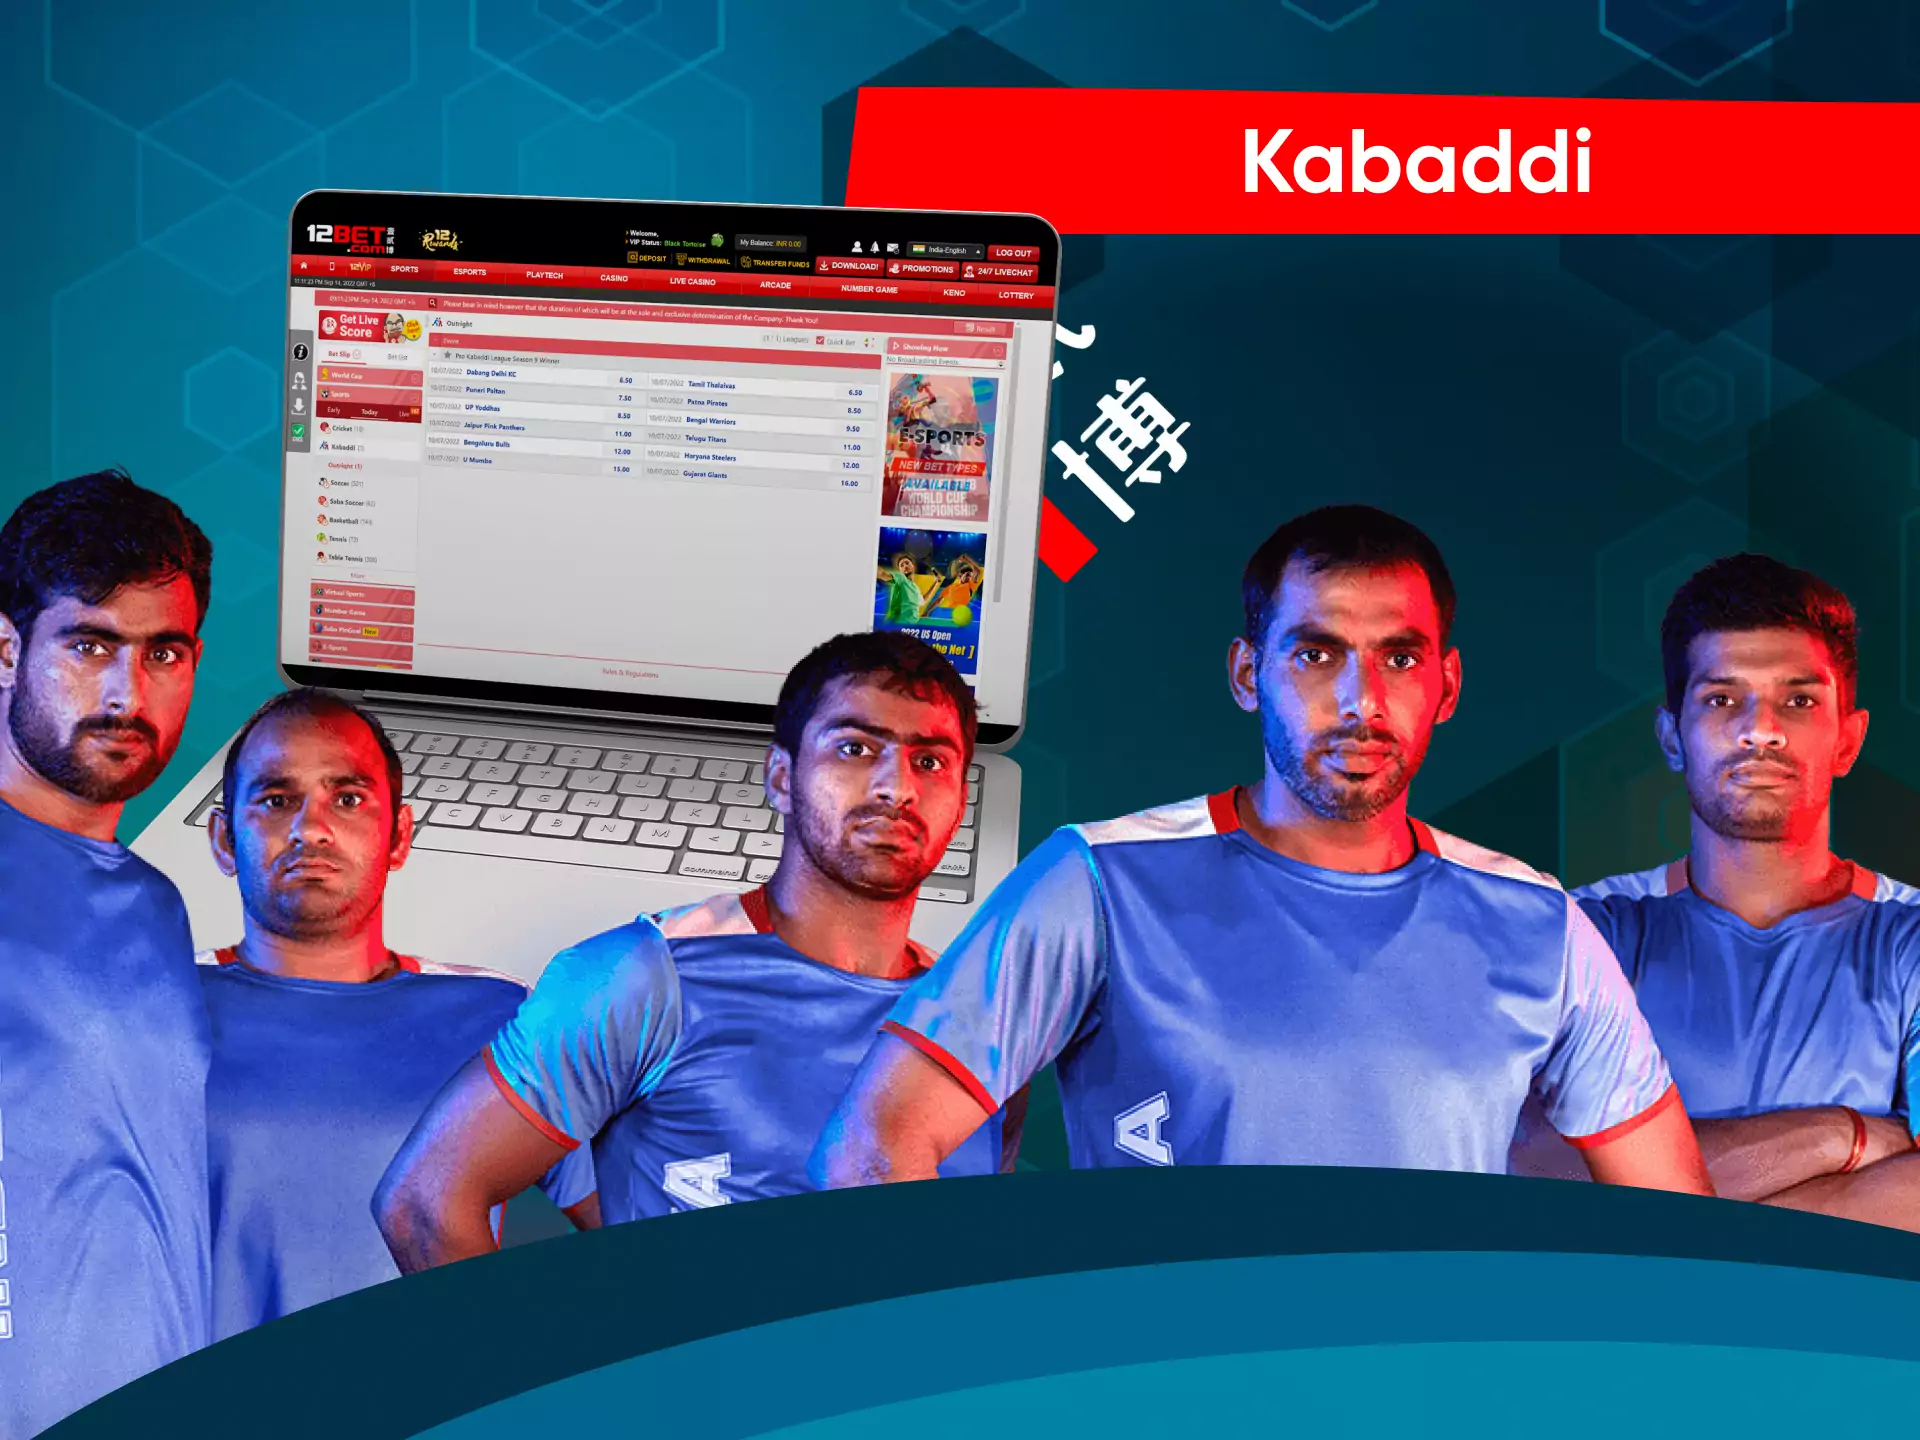 On 12bet, you can bet on kabaddi events.